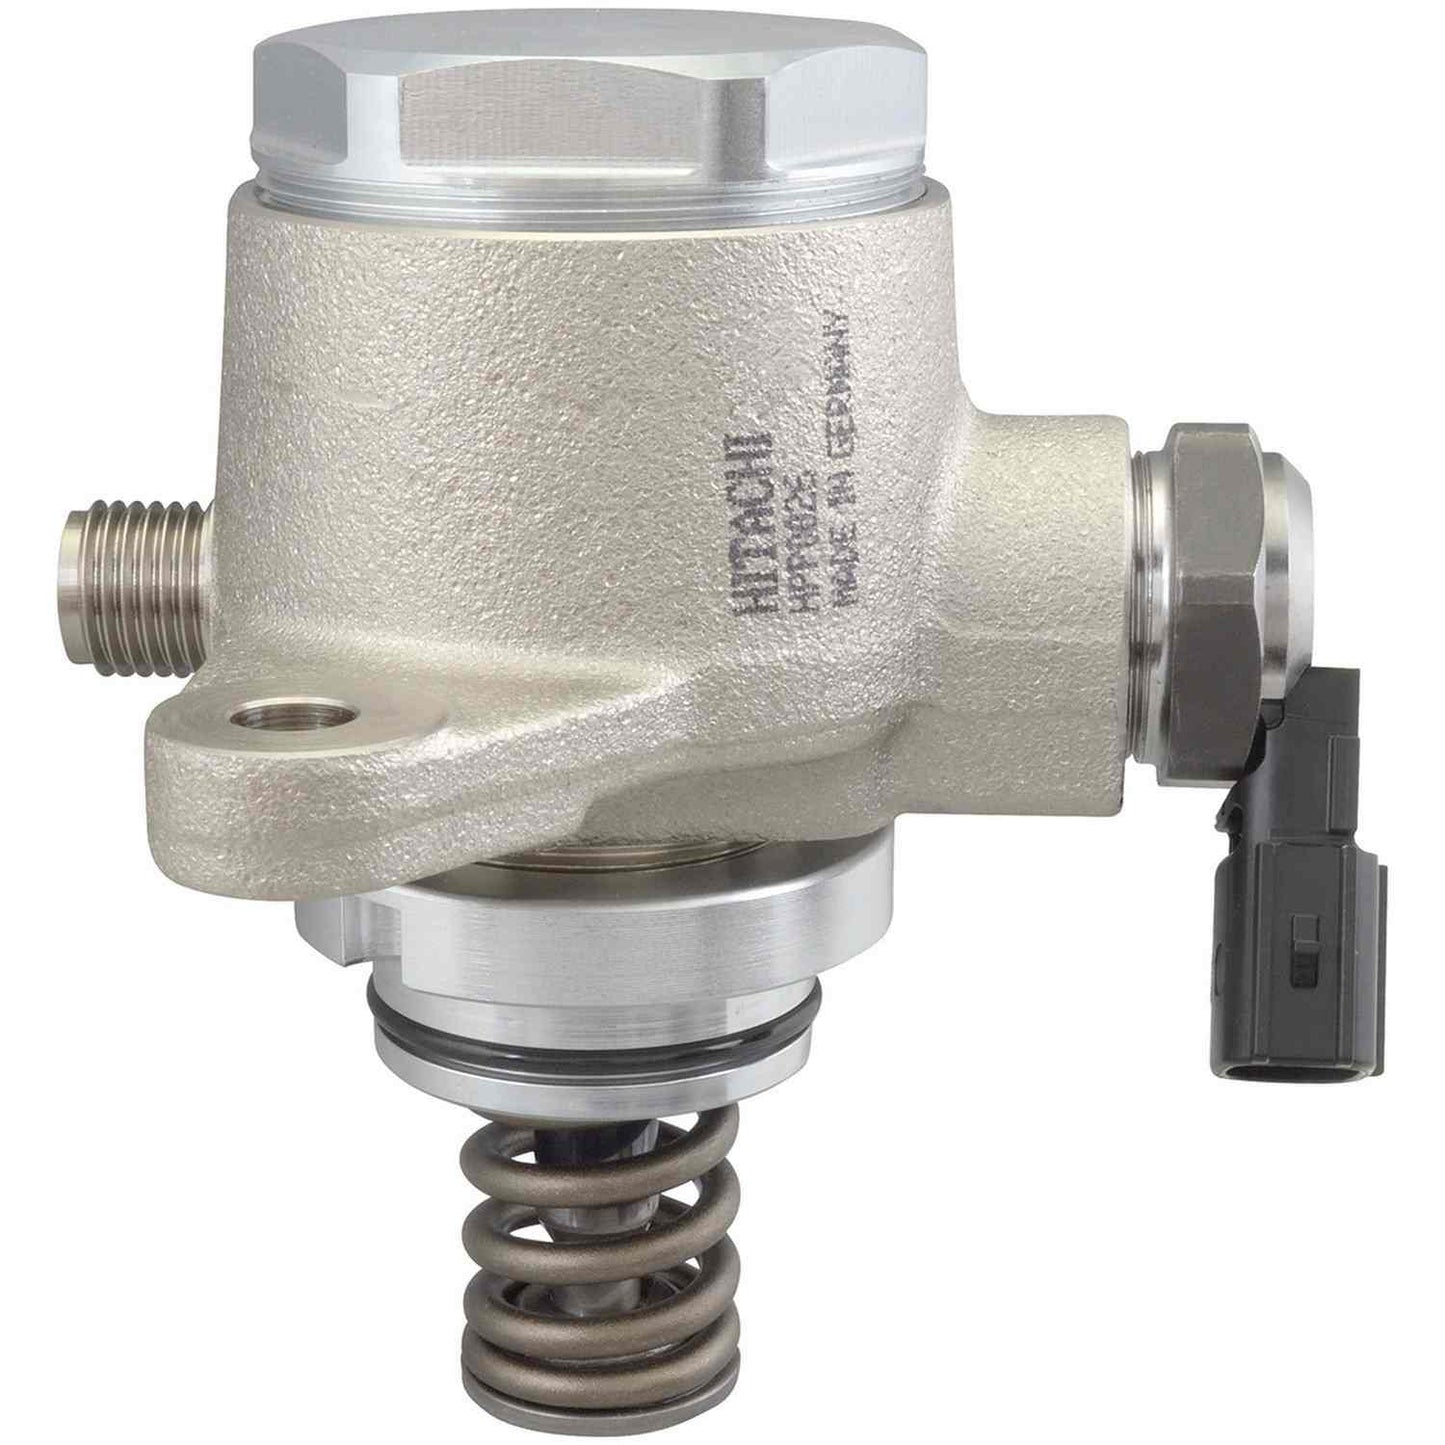 Connector View of Direct Injection High Pressure Fuel Pump HITACHI HPP0026